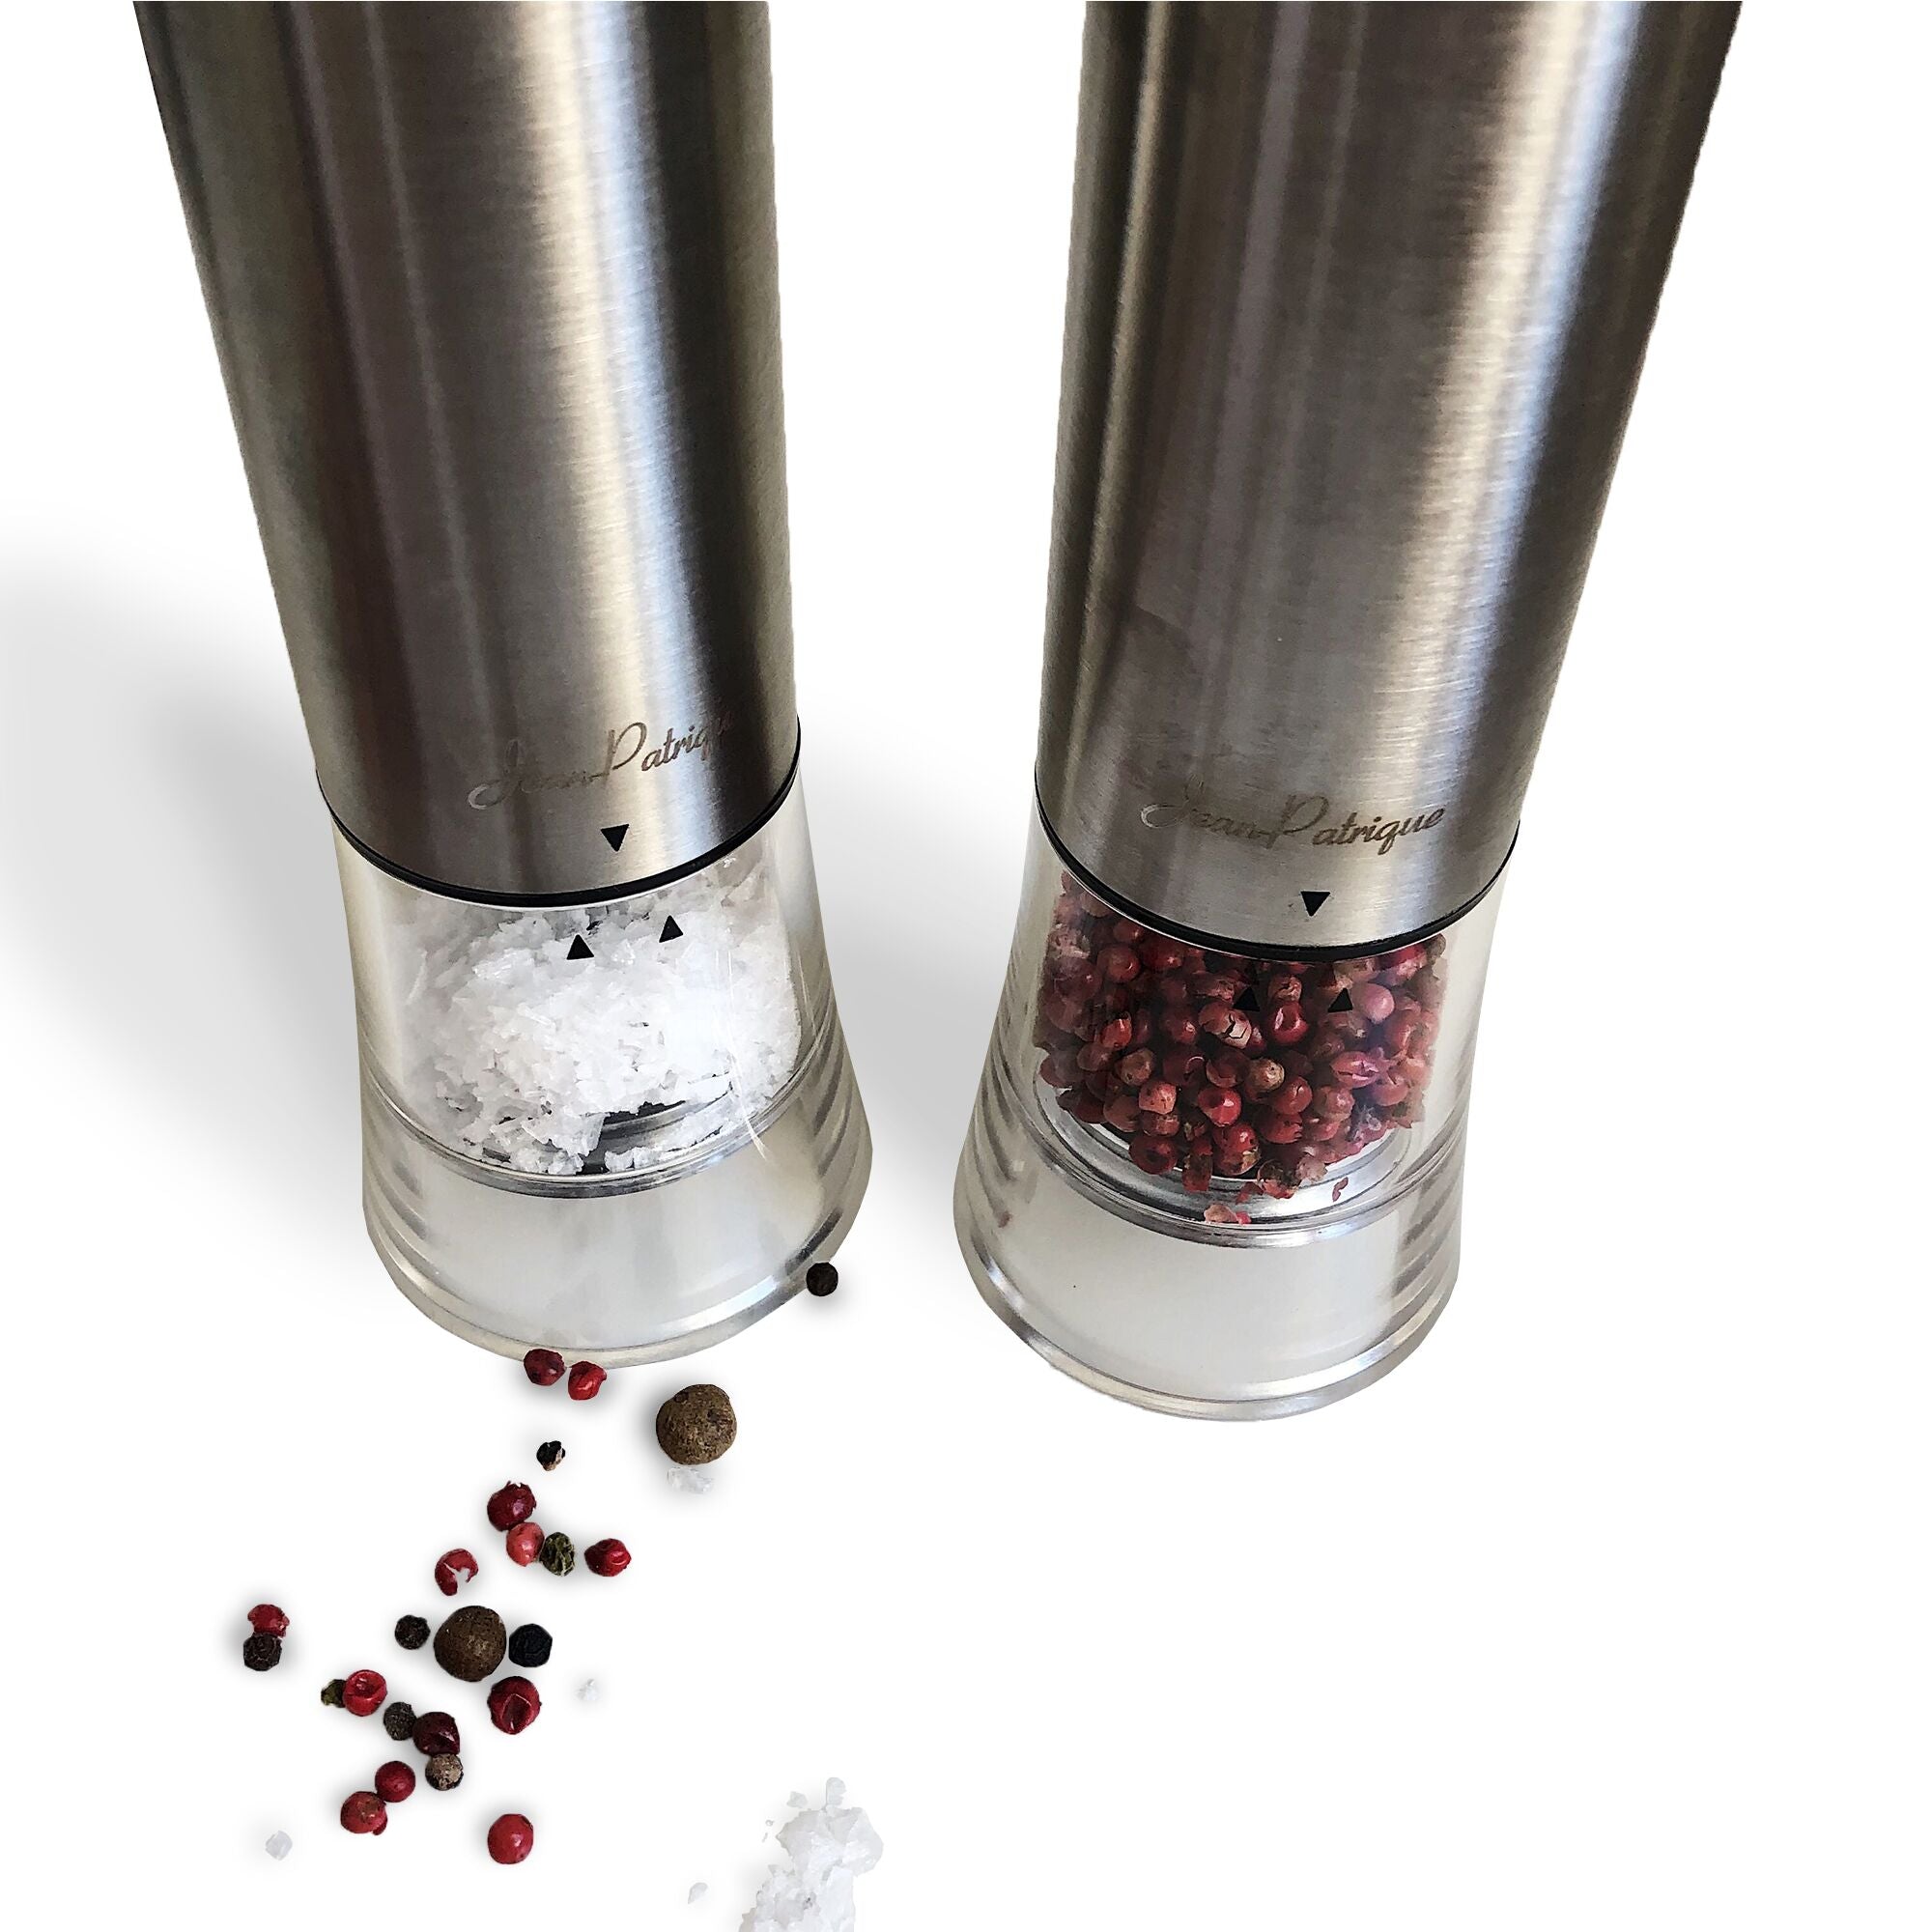 One-Touch Stainless Steel Electronic Salt and Pepper Mill - Single